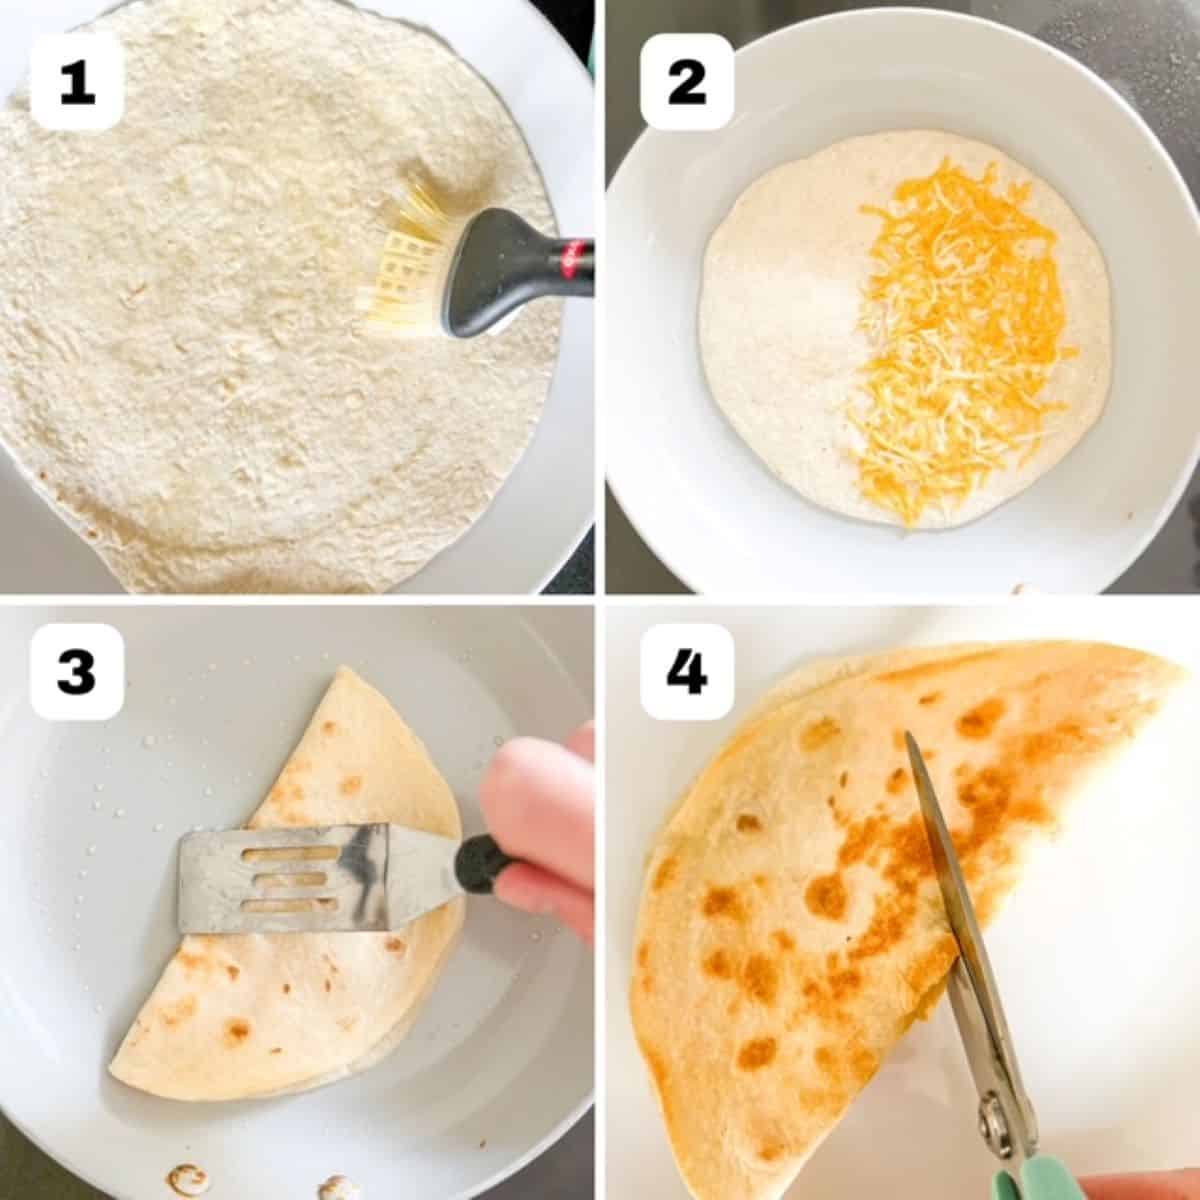 Four images showing steps to make a cheese quesadilla.